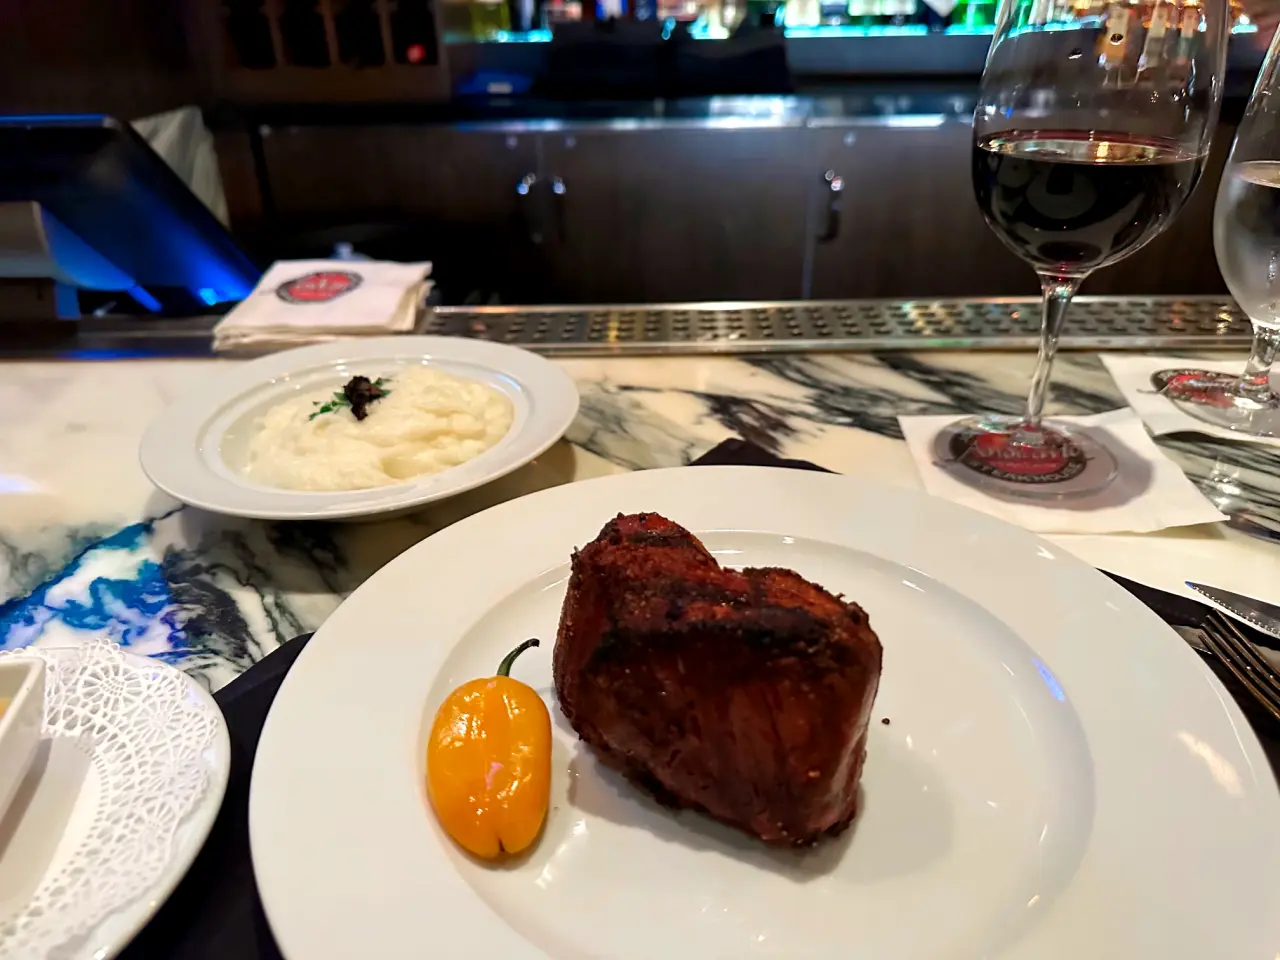 Photo of a steak, whipped potatoes, and wine